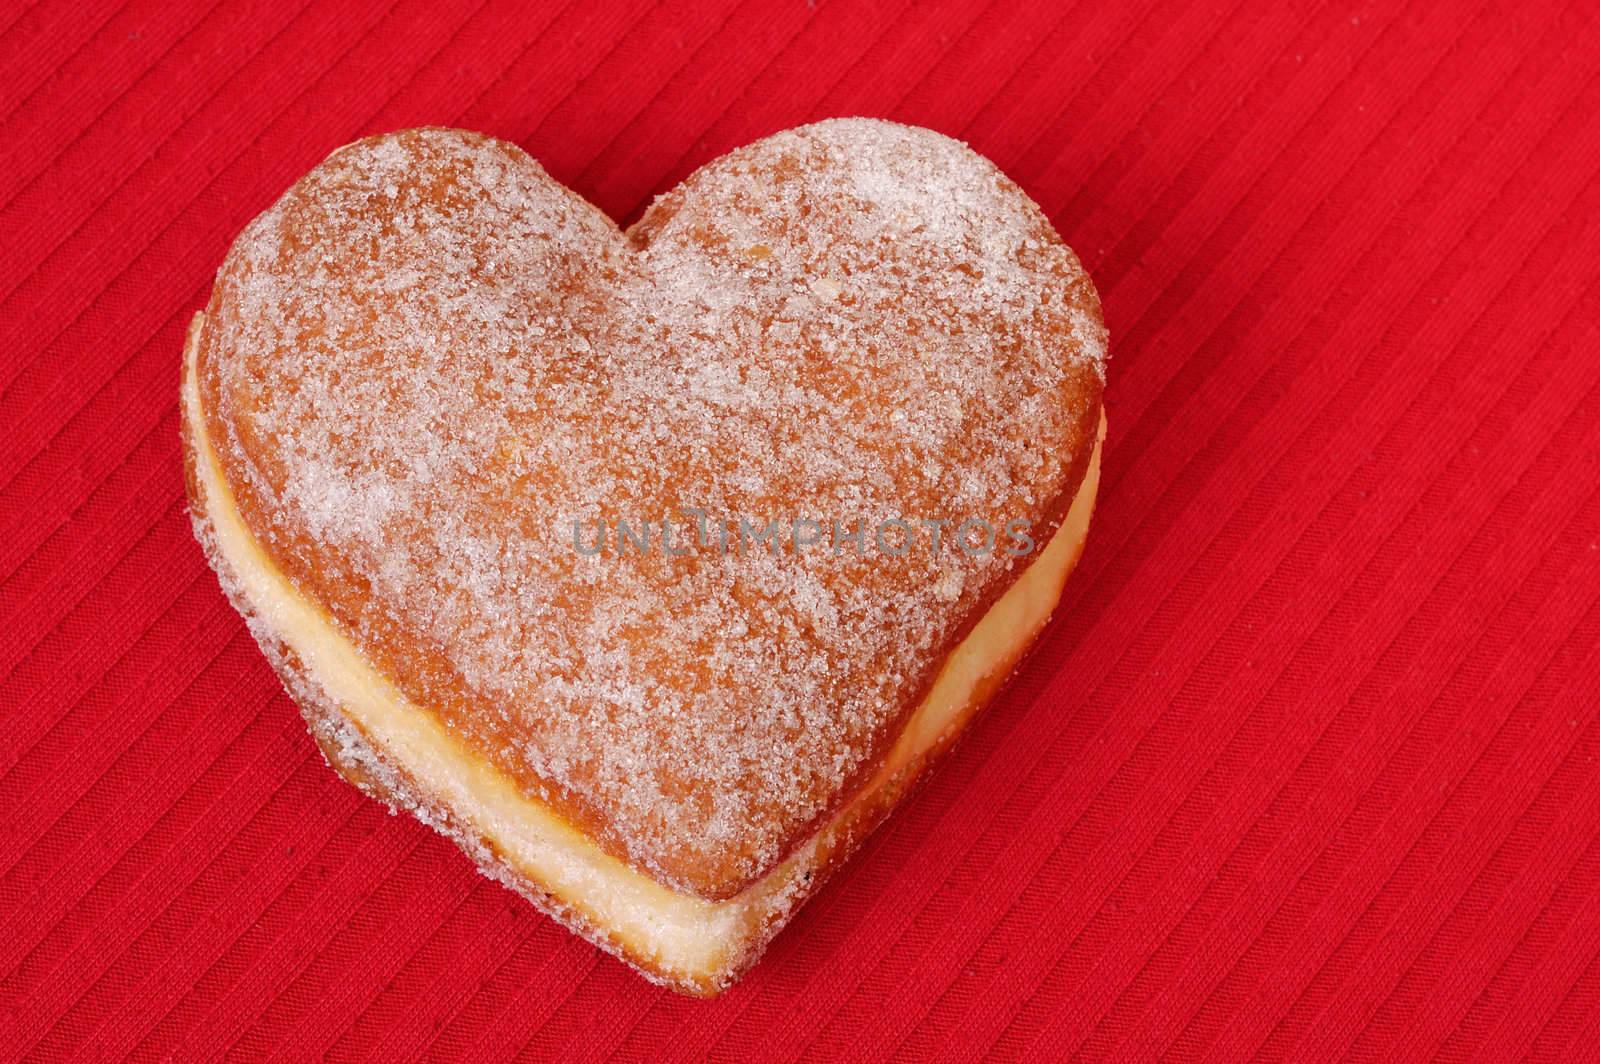 Heart-shaped cruller by ystock